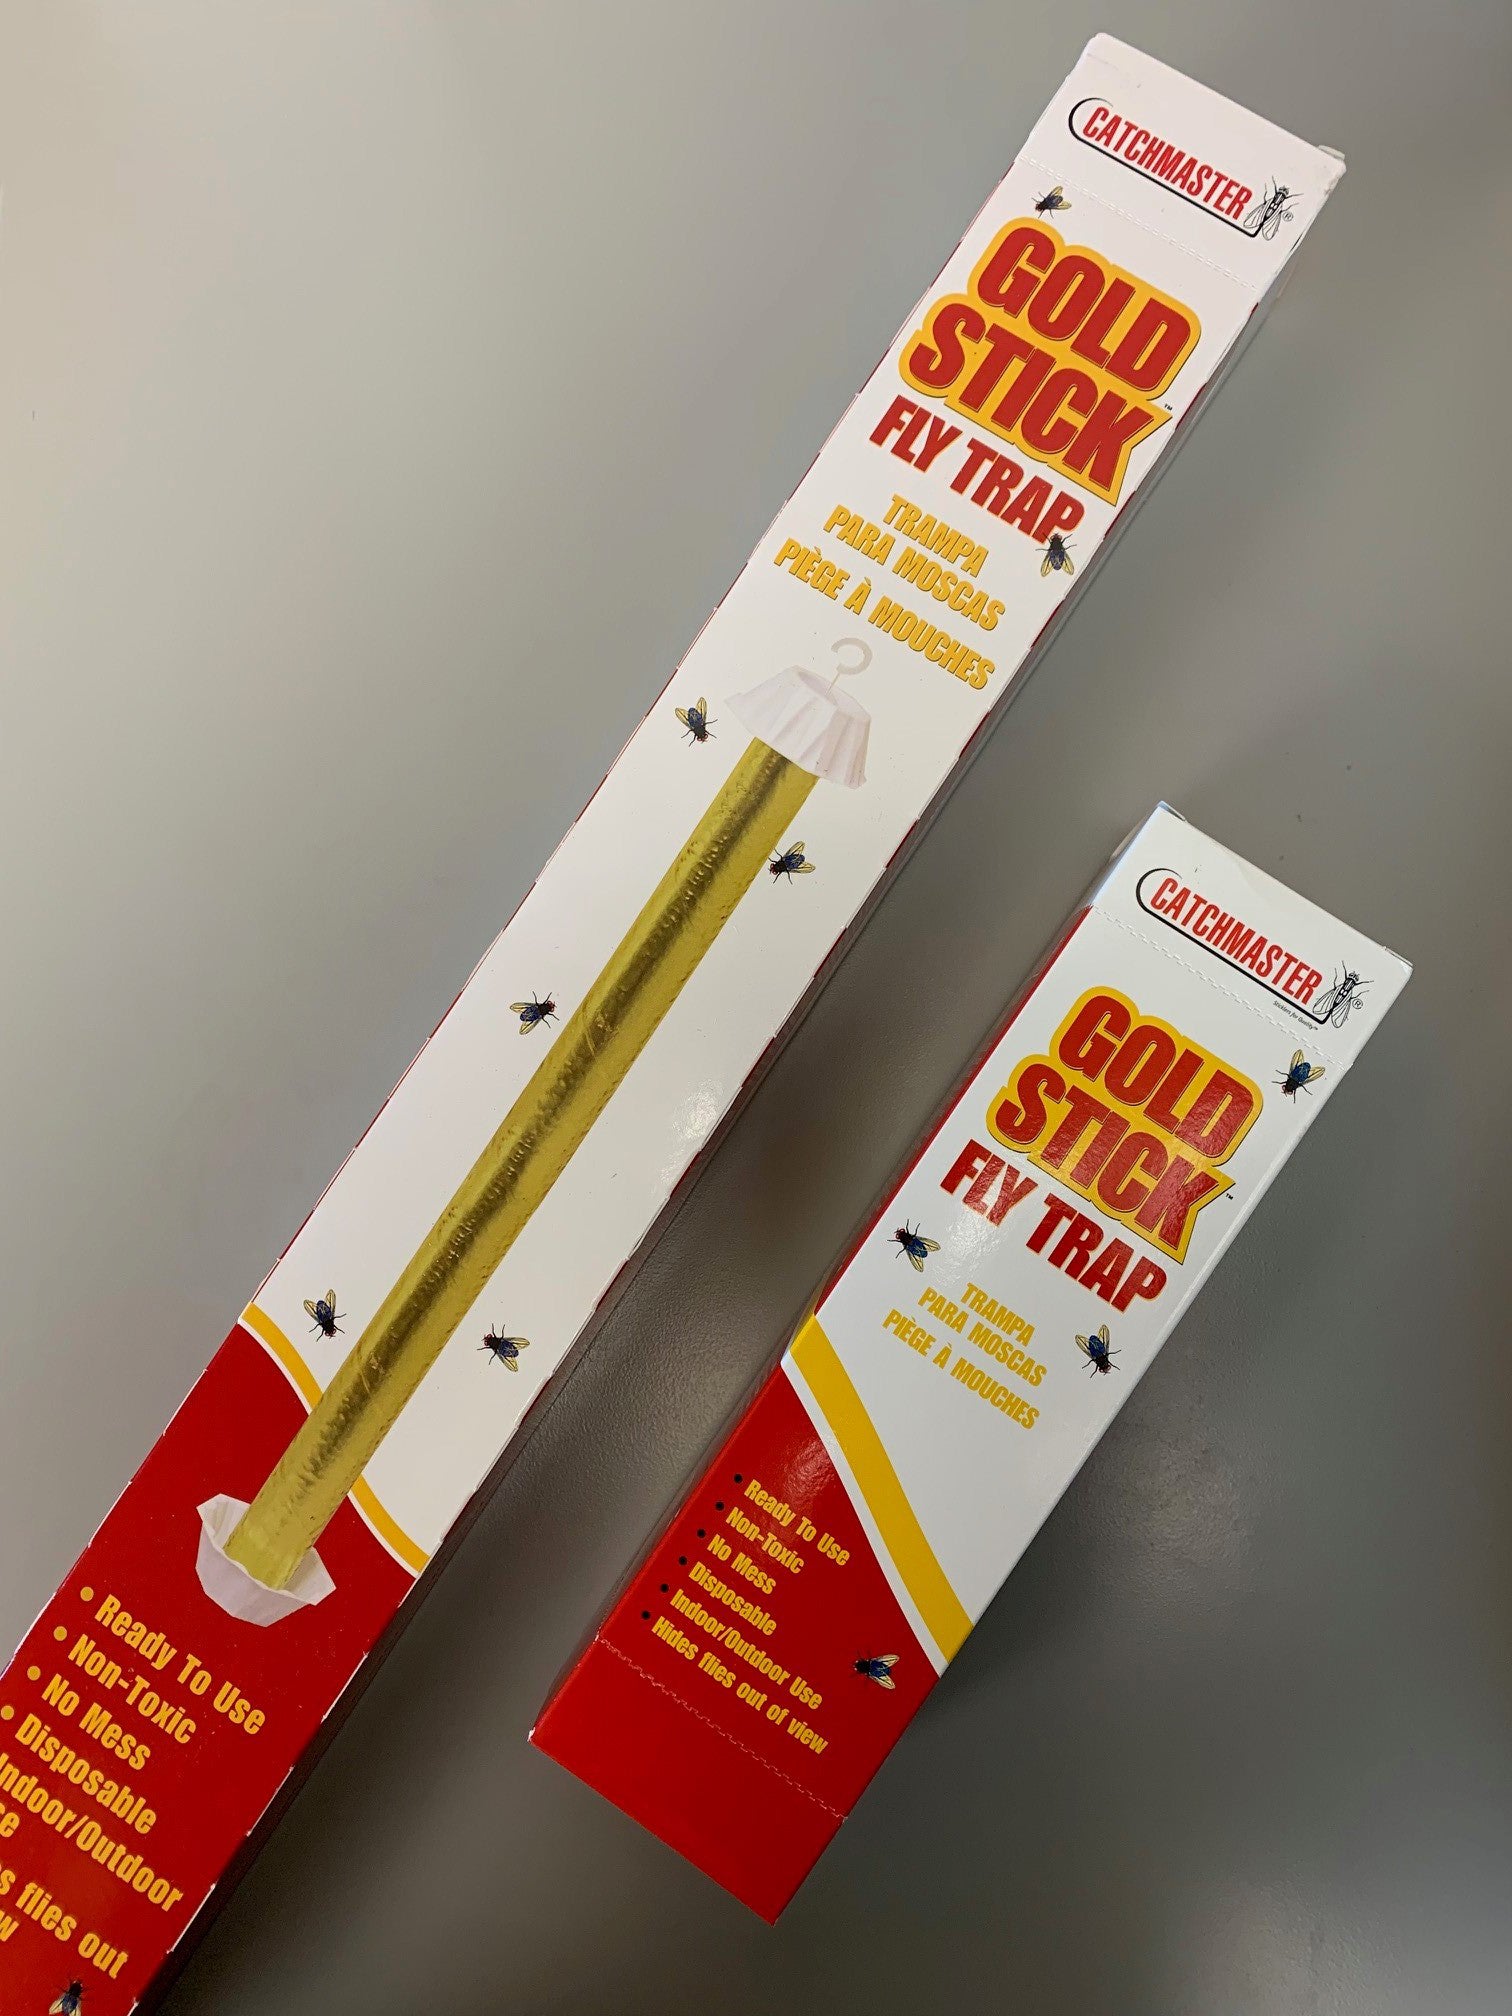 Gold Stick Fly Trap